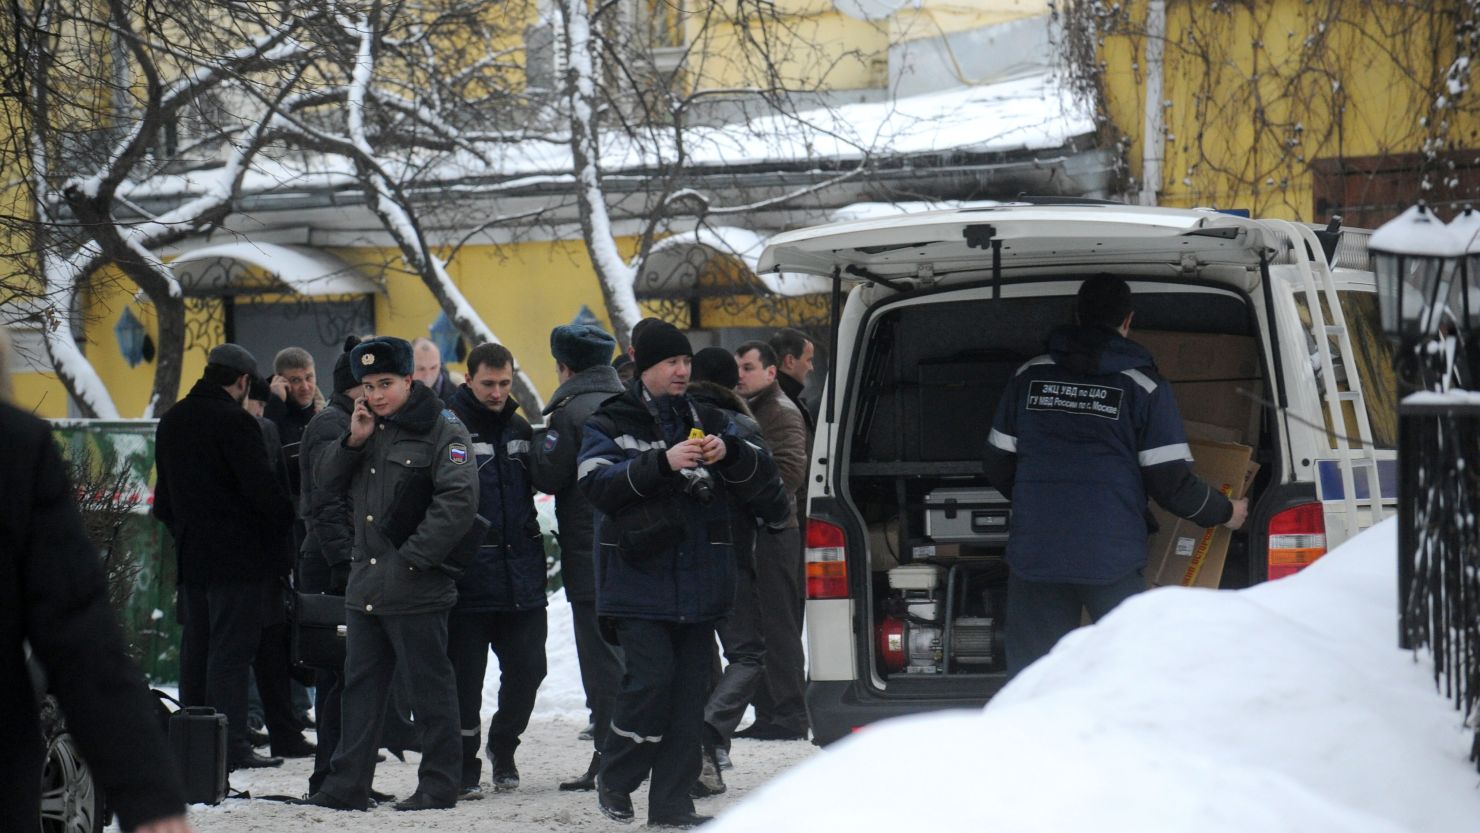 Police look at the scene where a reputed Russian mafia kingpin was fatally shot outside a Moscow restaurant Wednesday.